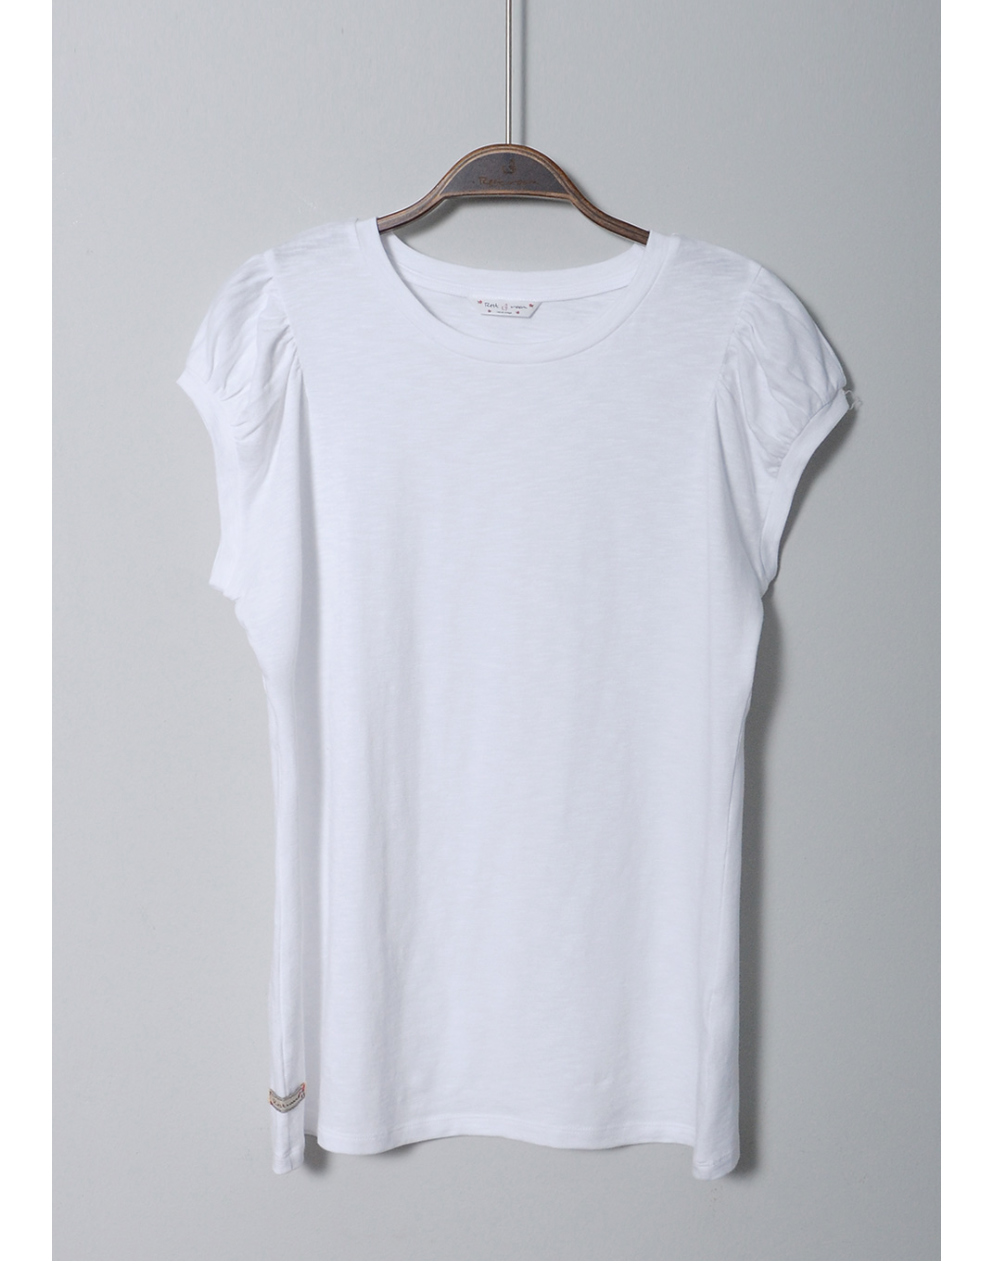 short sleeved tee white color image-S1L43